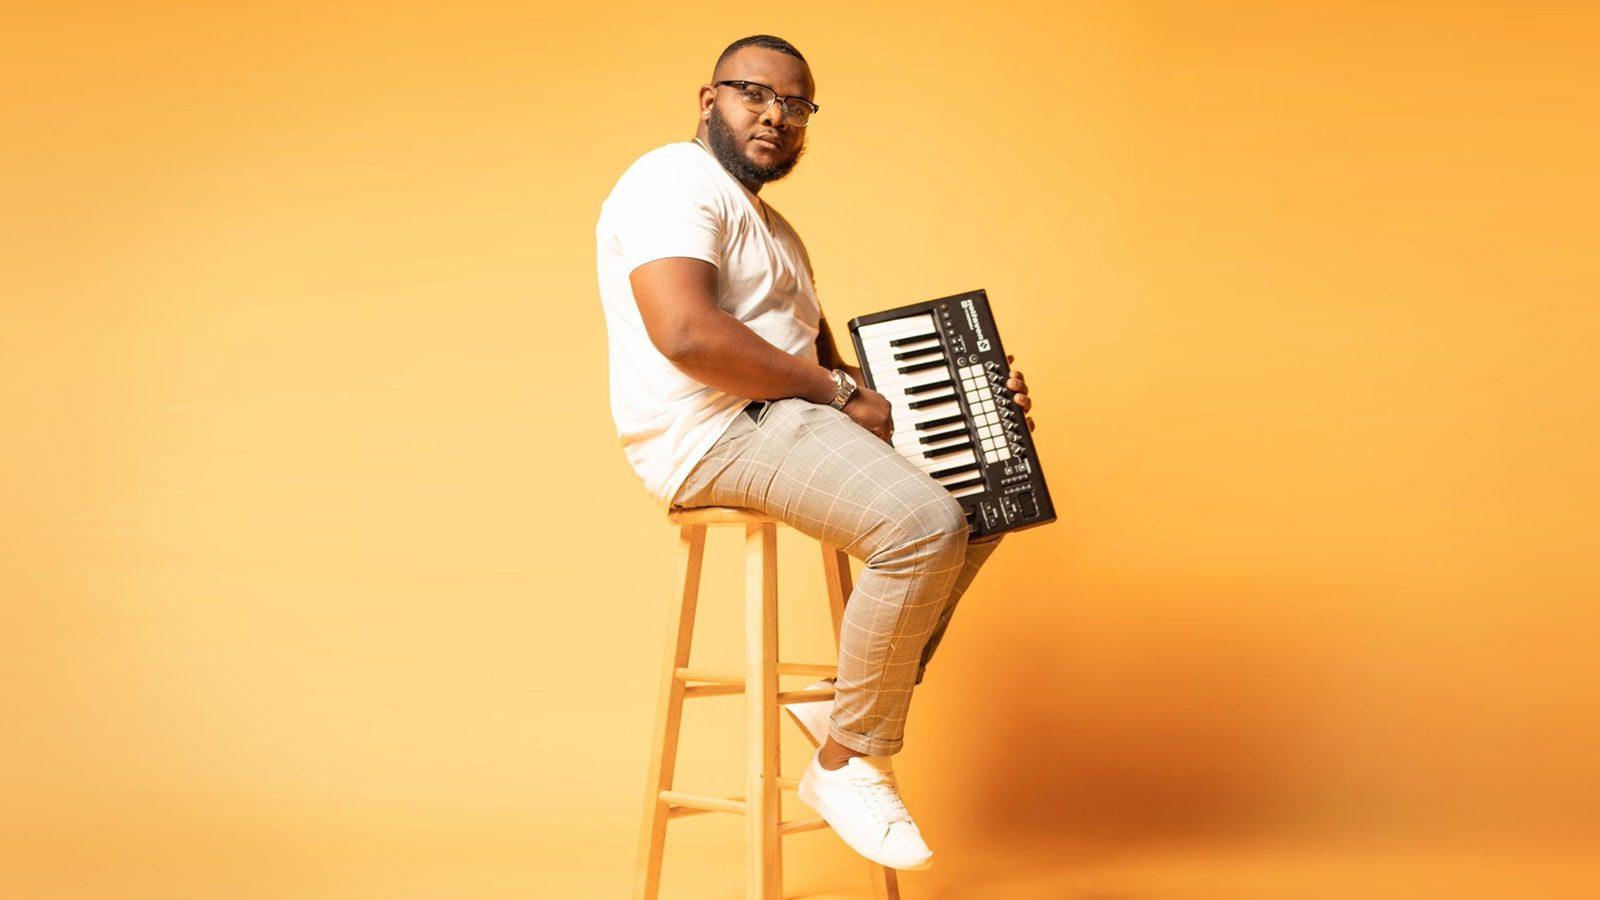 Chavez Parker sits on a stool and holds a keyboard. He wears glasses, a t-shirt, brown pants, and sneakers.